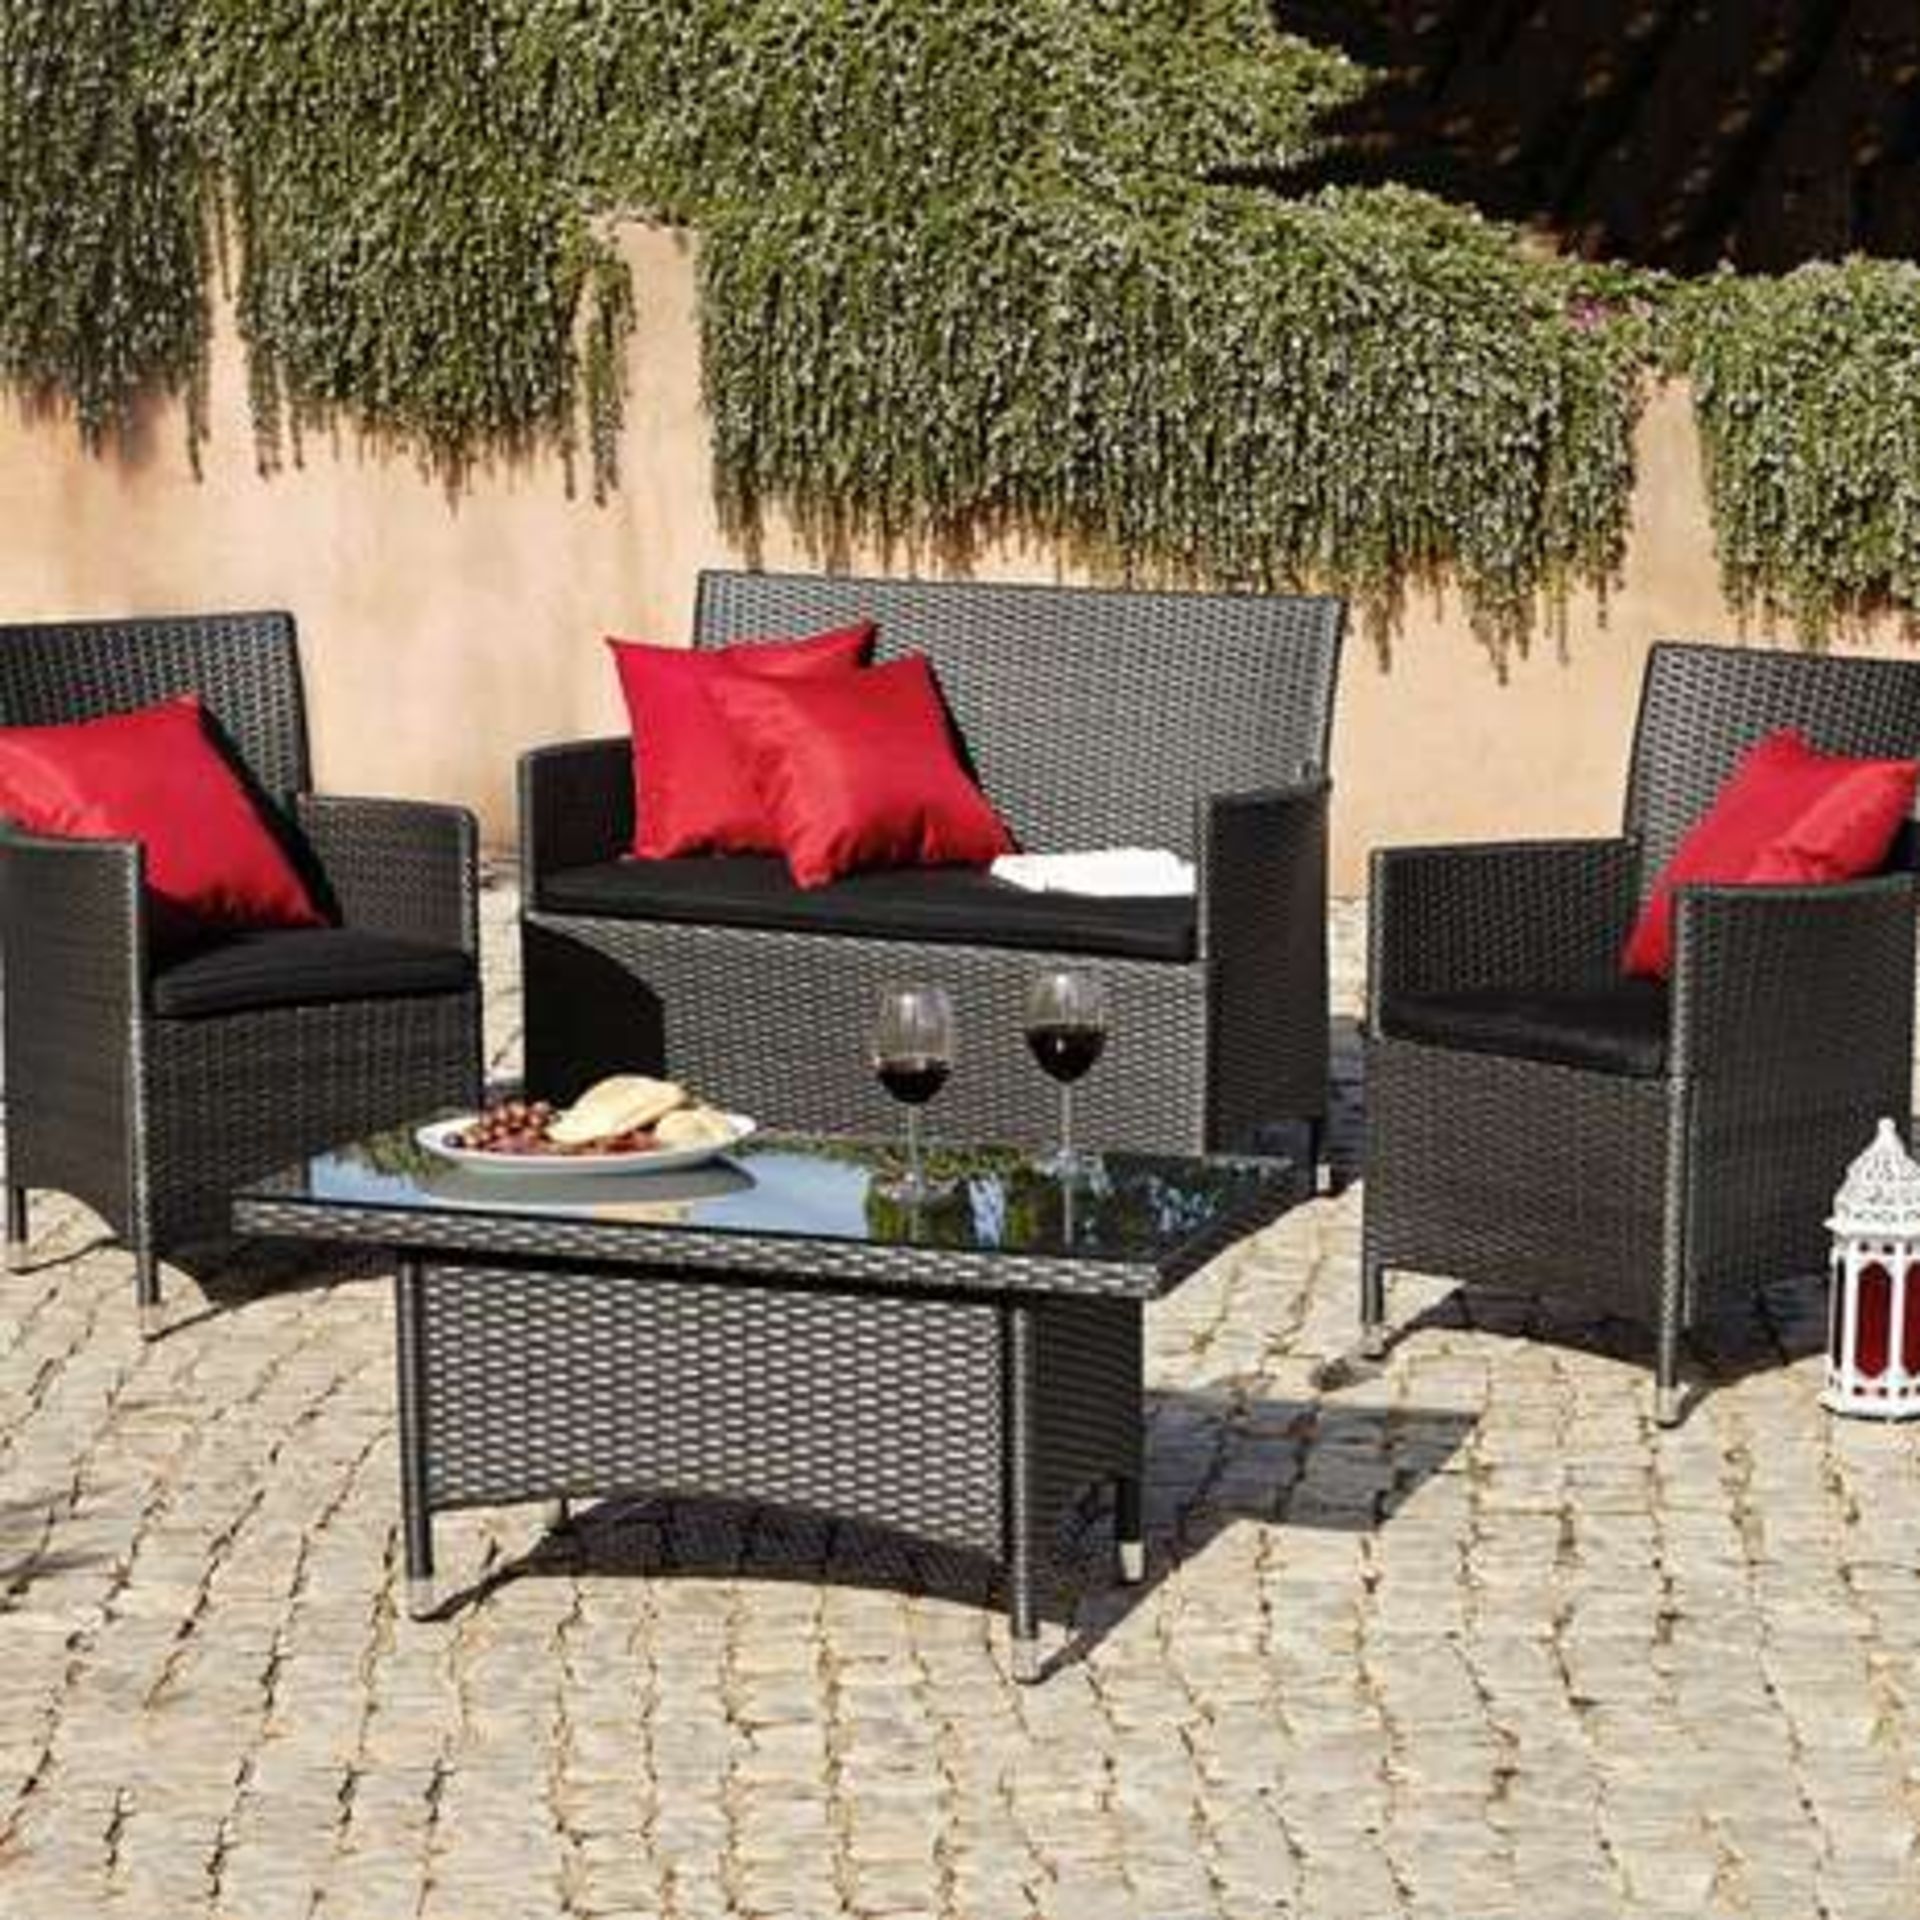 V Brand New Balinese Four Piece KD Conversation Set - Slate Grey Colour - Comes With Four Red